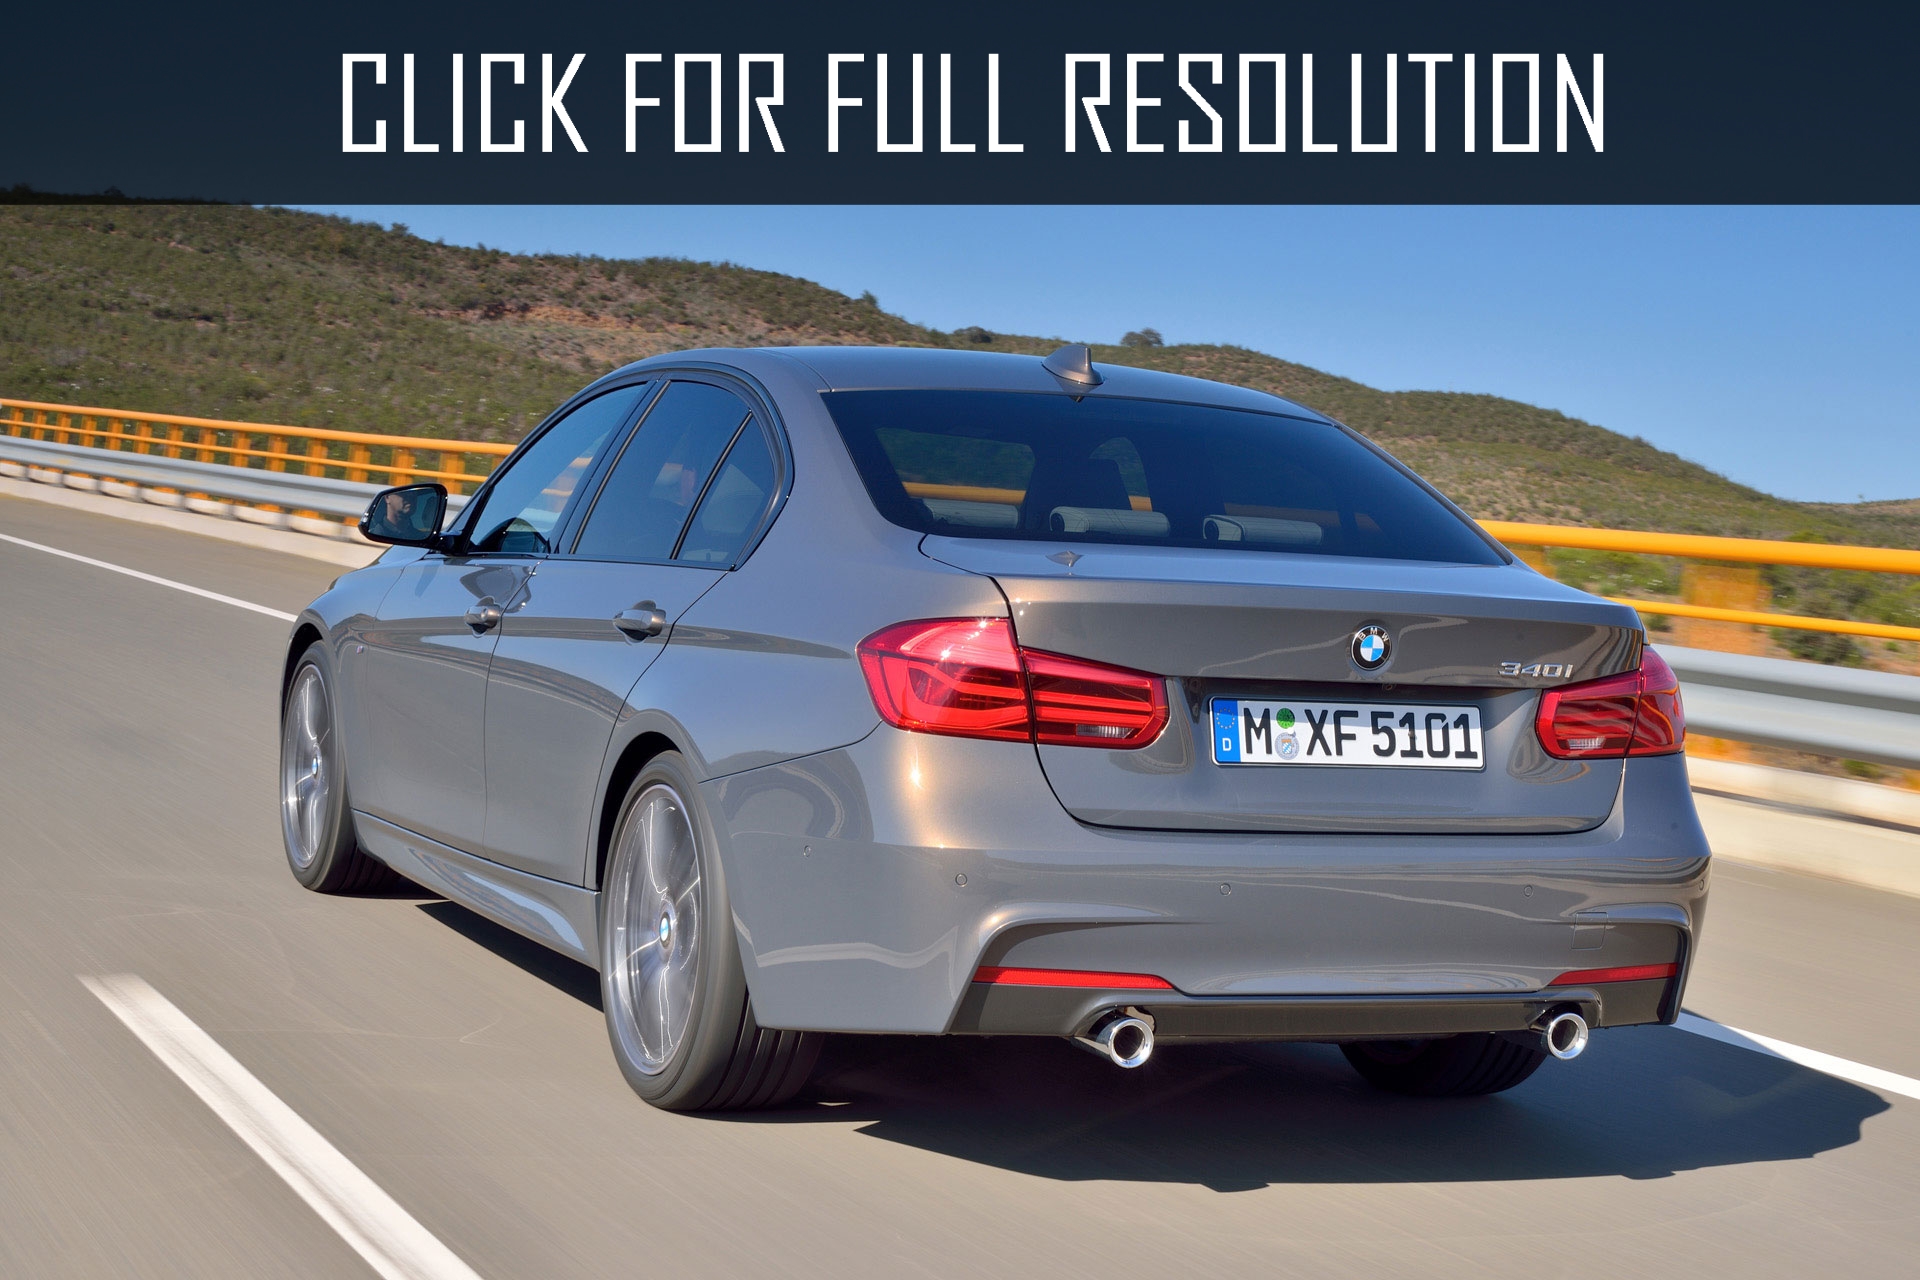 2016 Bmw F30 news, reviews, msrp, ratings with amazing